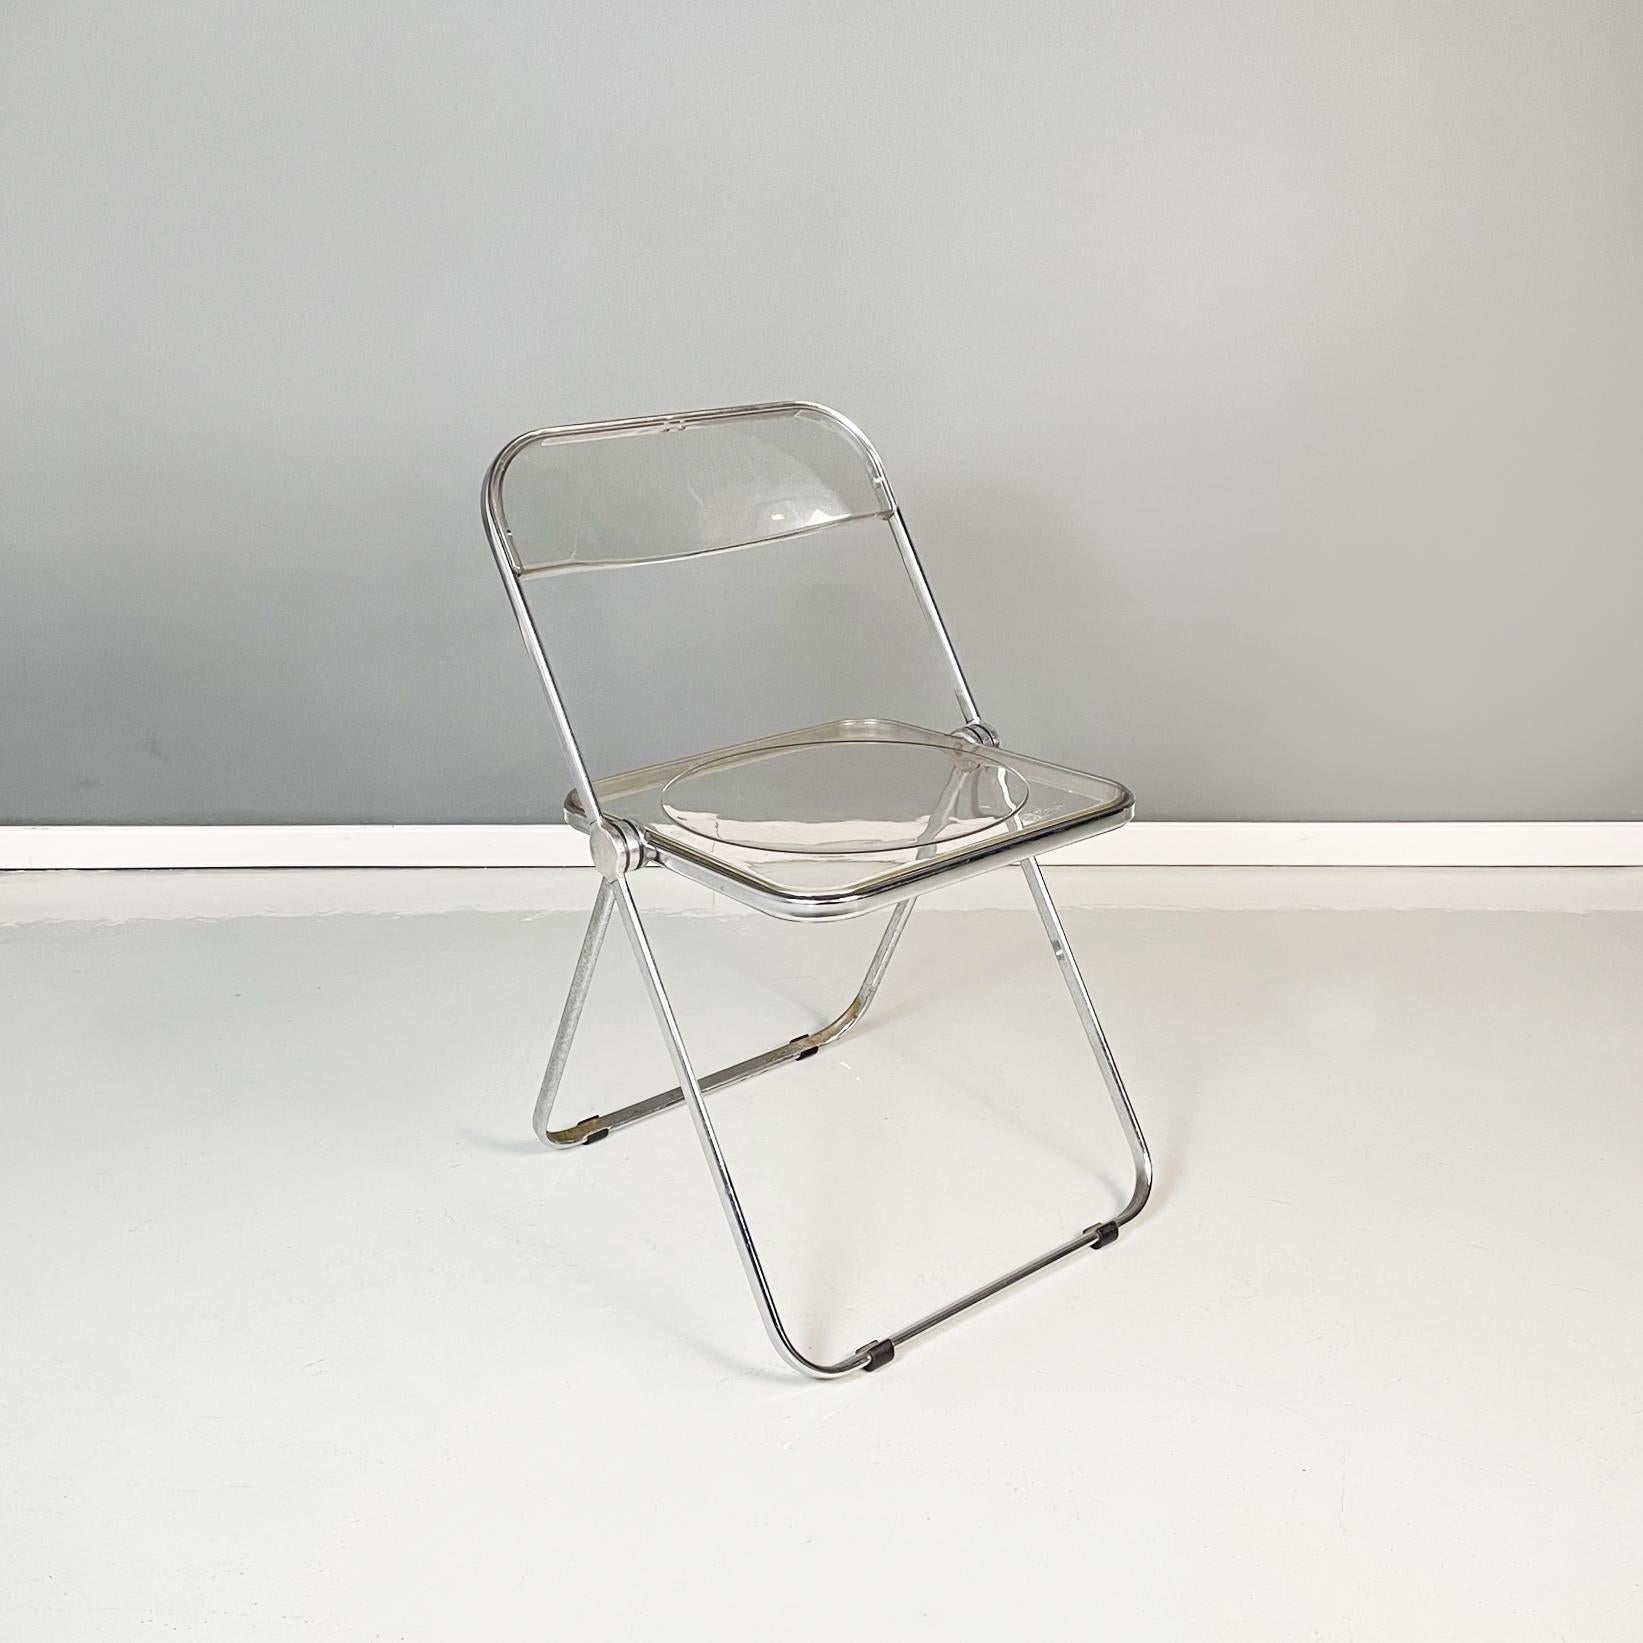 Italian modern Folding chairs mod. Plia by Giancarlo Piretti for Anonima Castelli, 1970s
Pair of iconic and fantastic folding chairs mod. Plia with square seat and back in transparent abs. The structure is in steel.
They are produced by Anonima